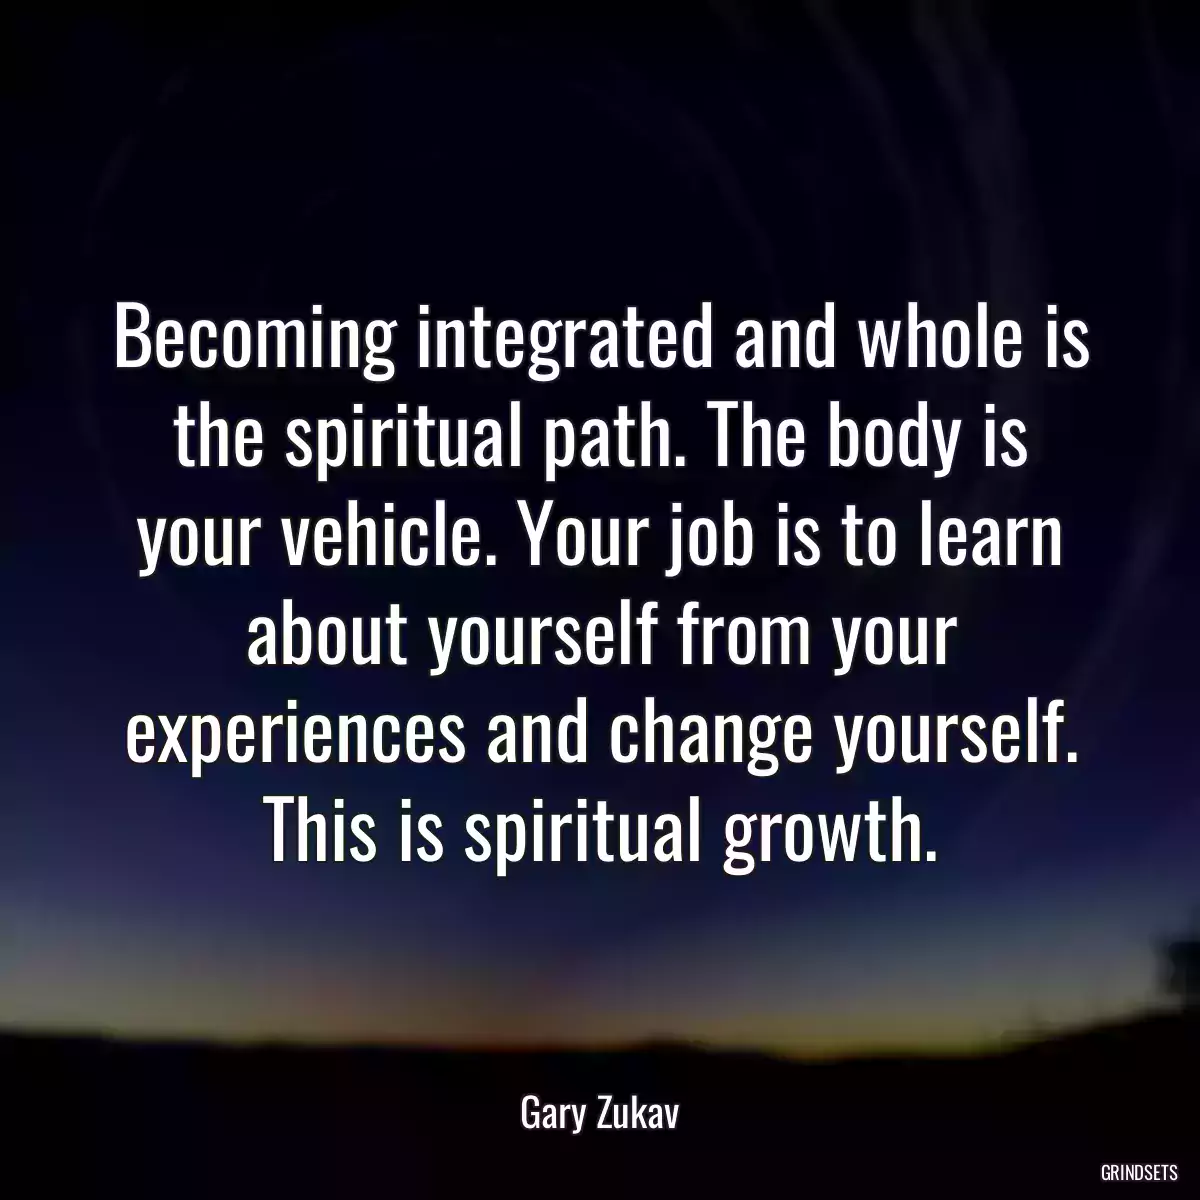 Becoming integrated and whole is the spiritual path. The body is your vehicle. Your job is to learn about yourself from your experiences and change yourself. This is spiritual growth.